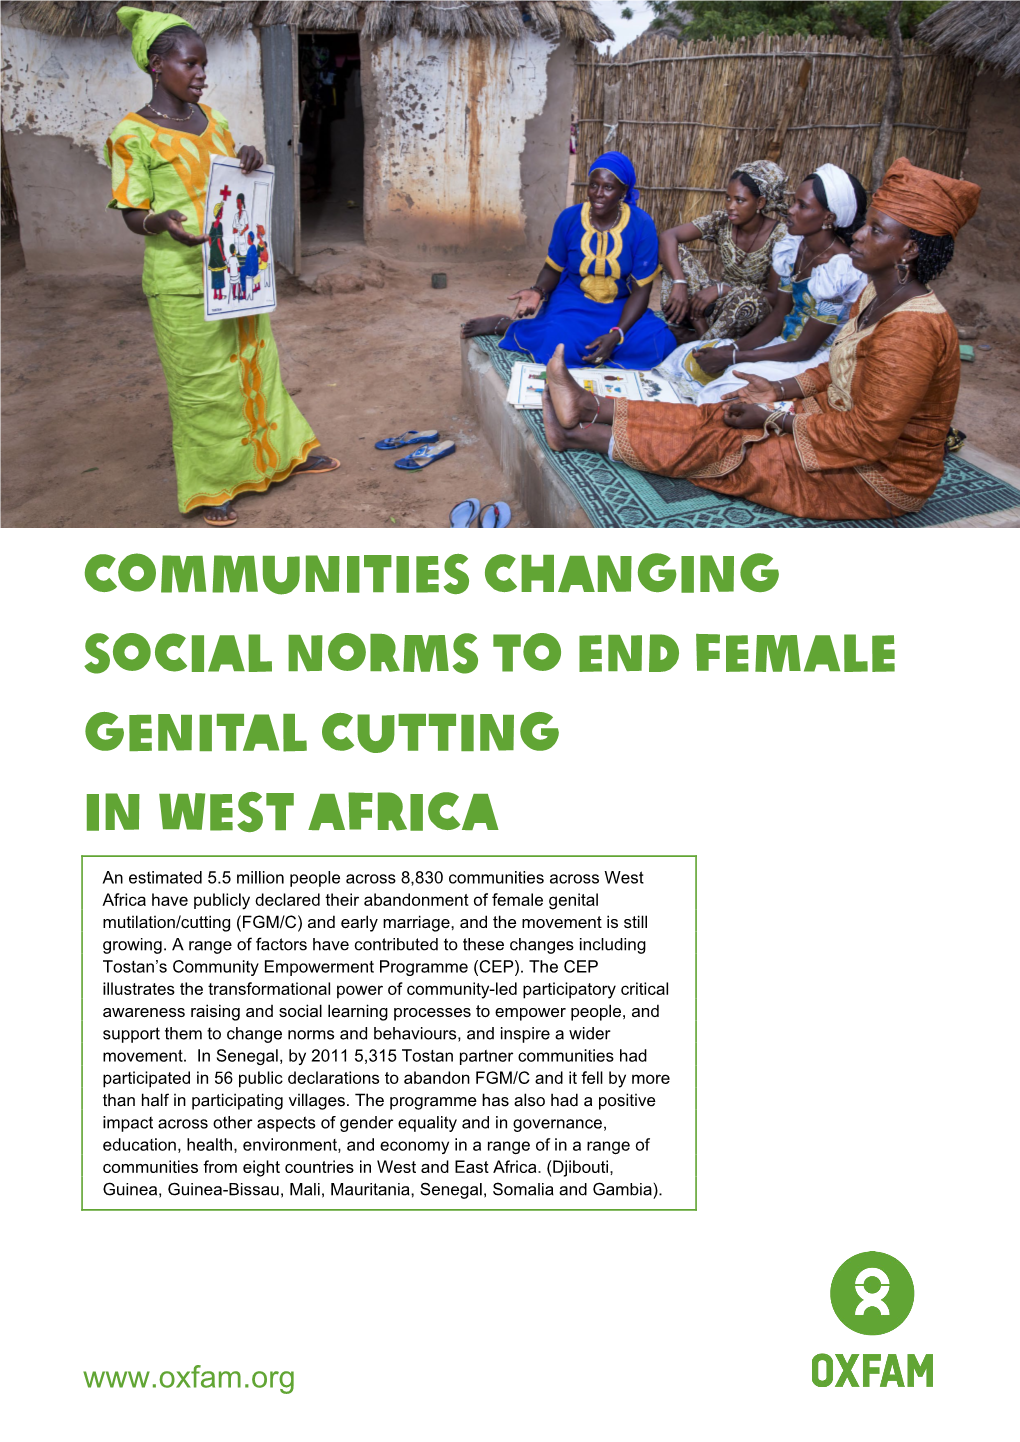 Communities Shifting Social Norms to End Female Genital Cutting in West